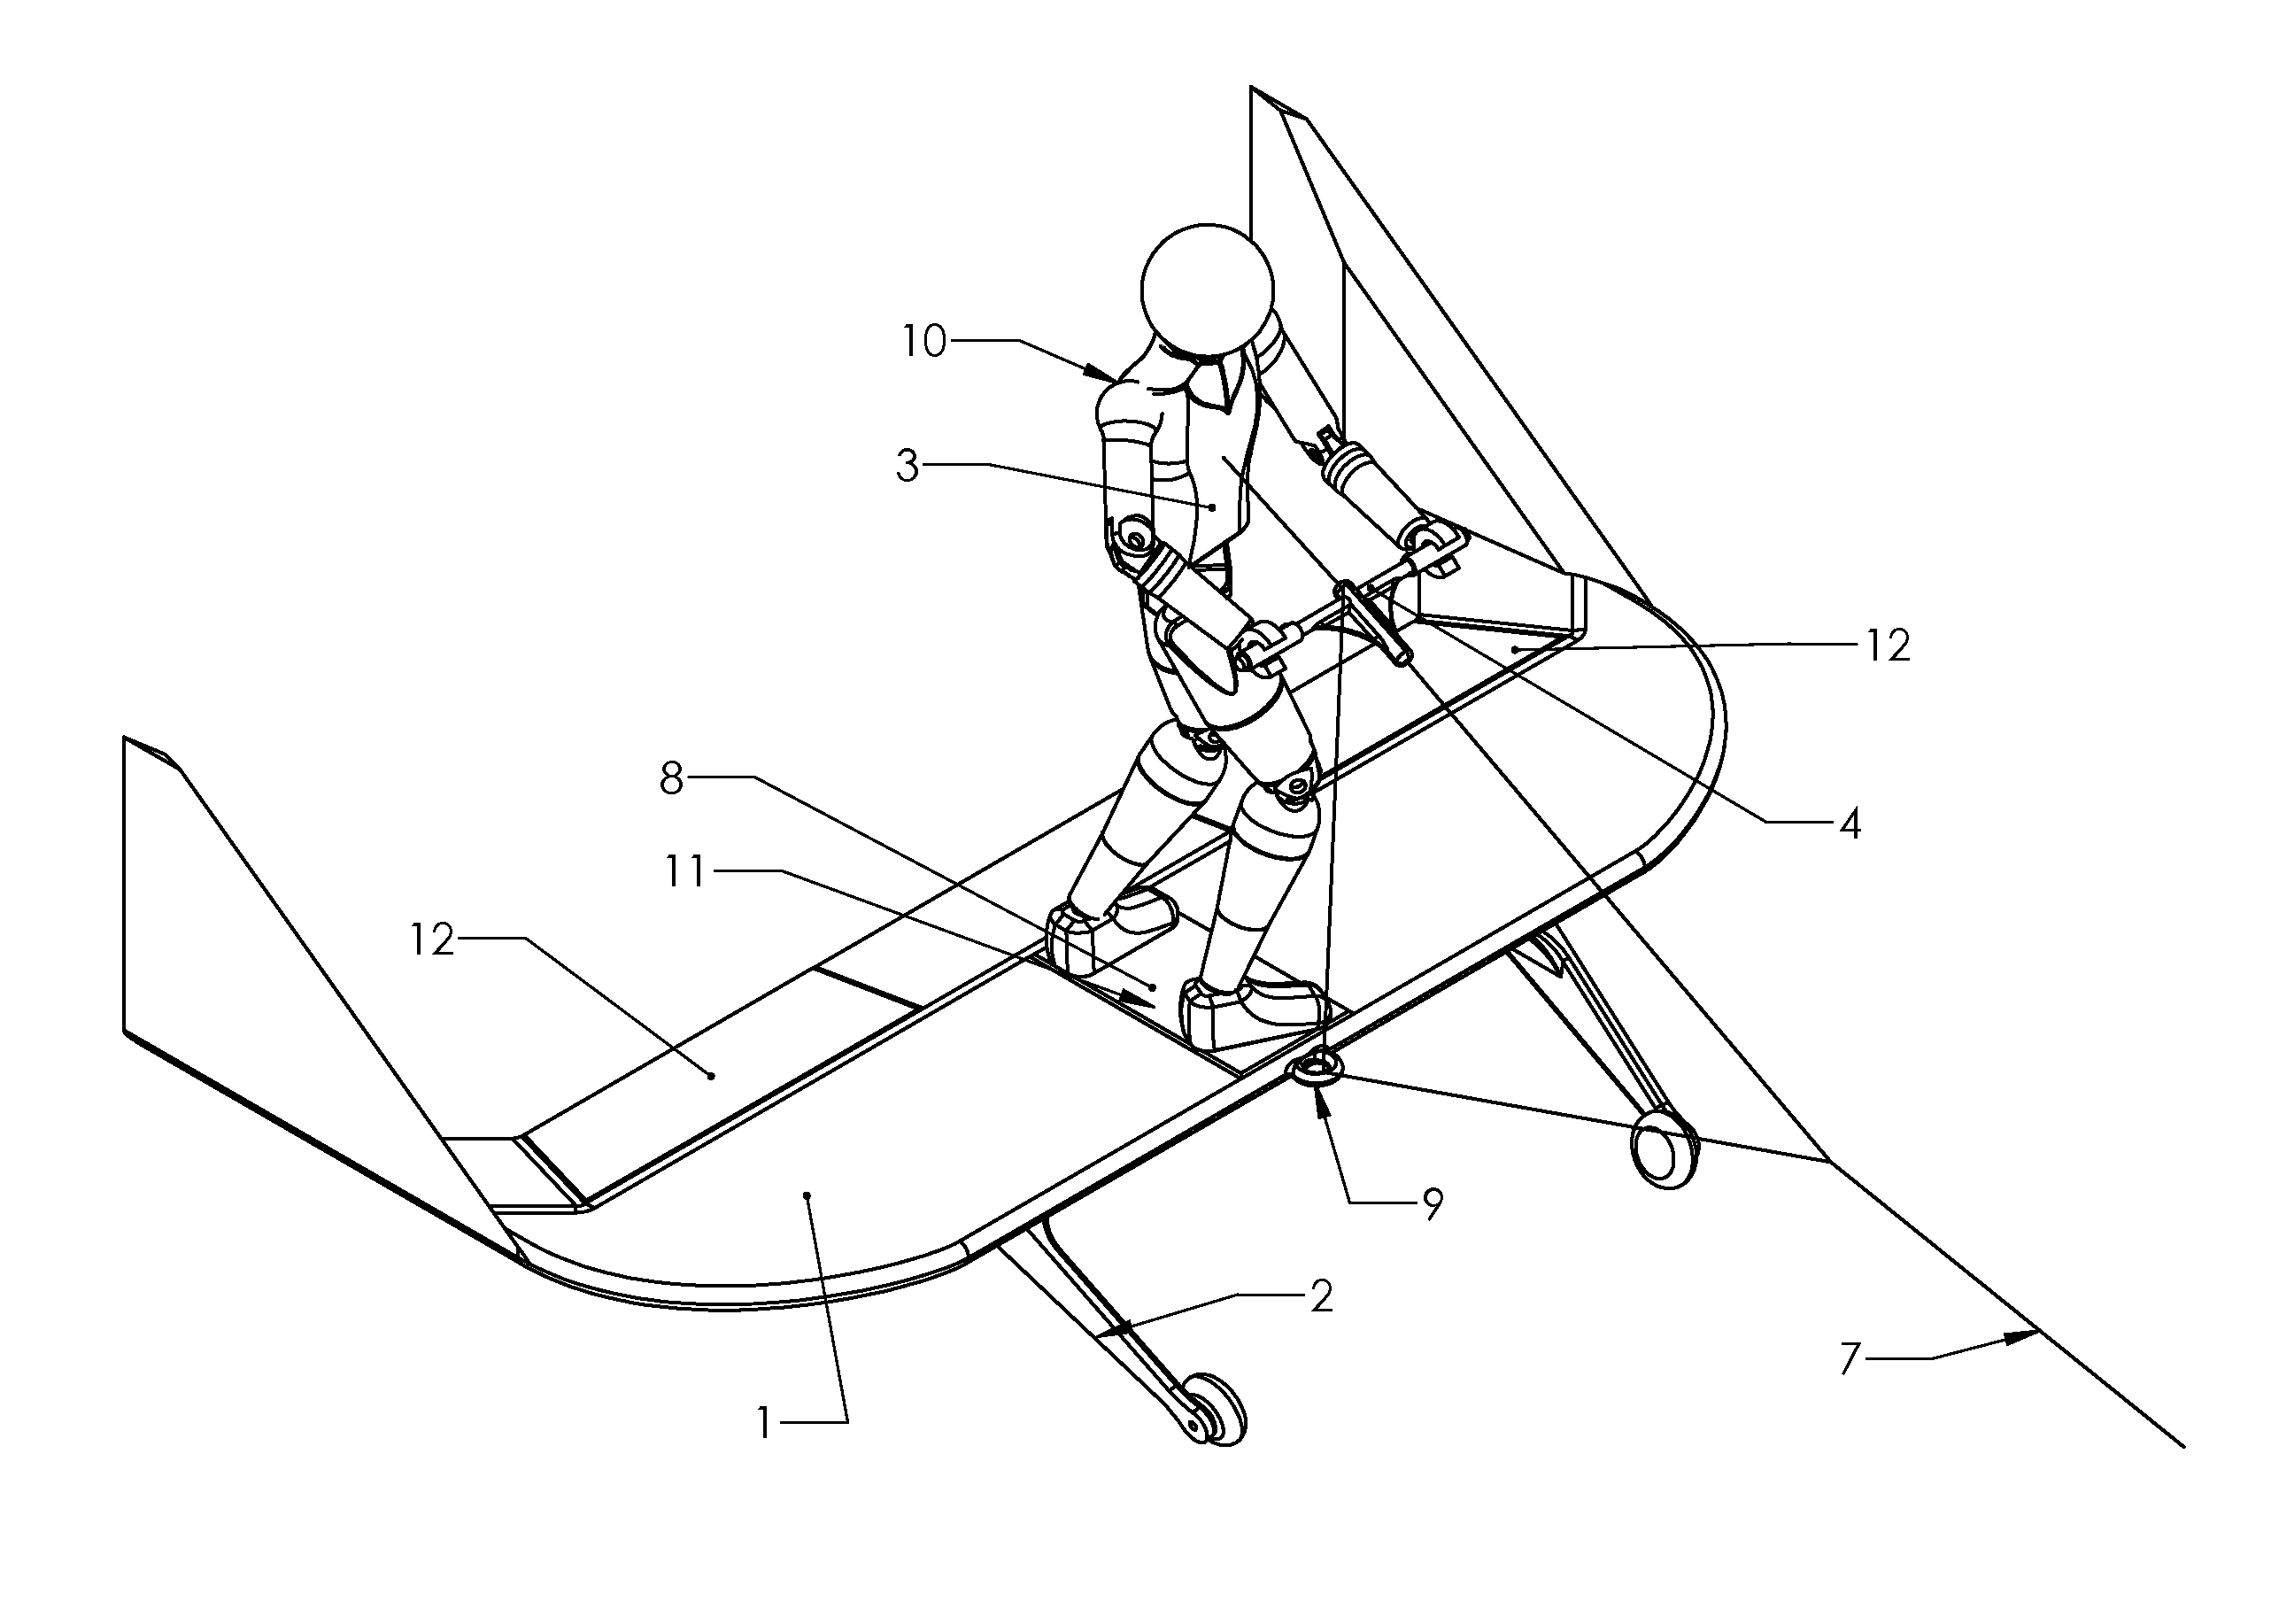 System for Airboarding Behind an Aircraft